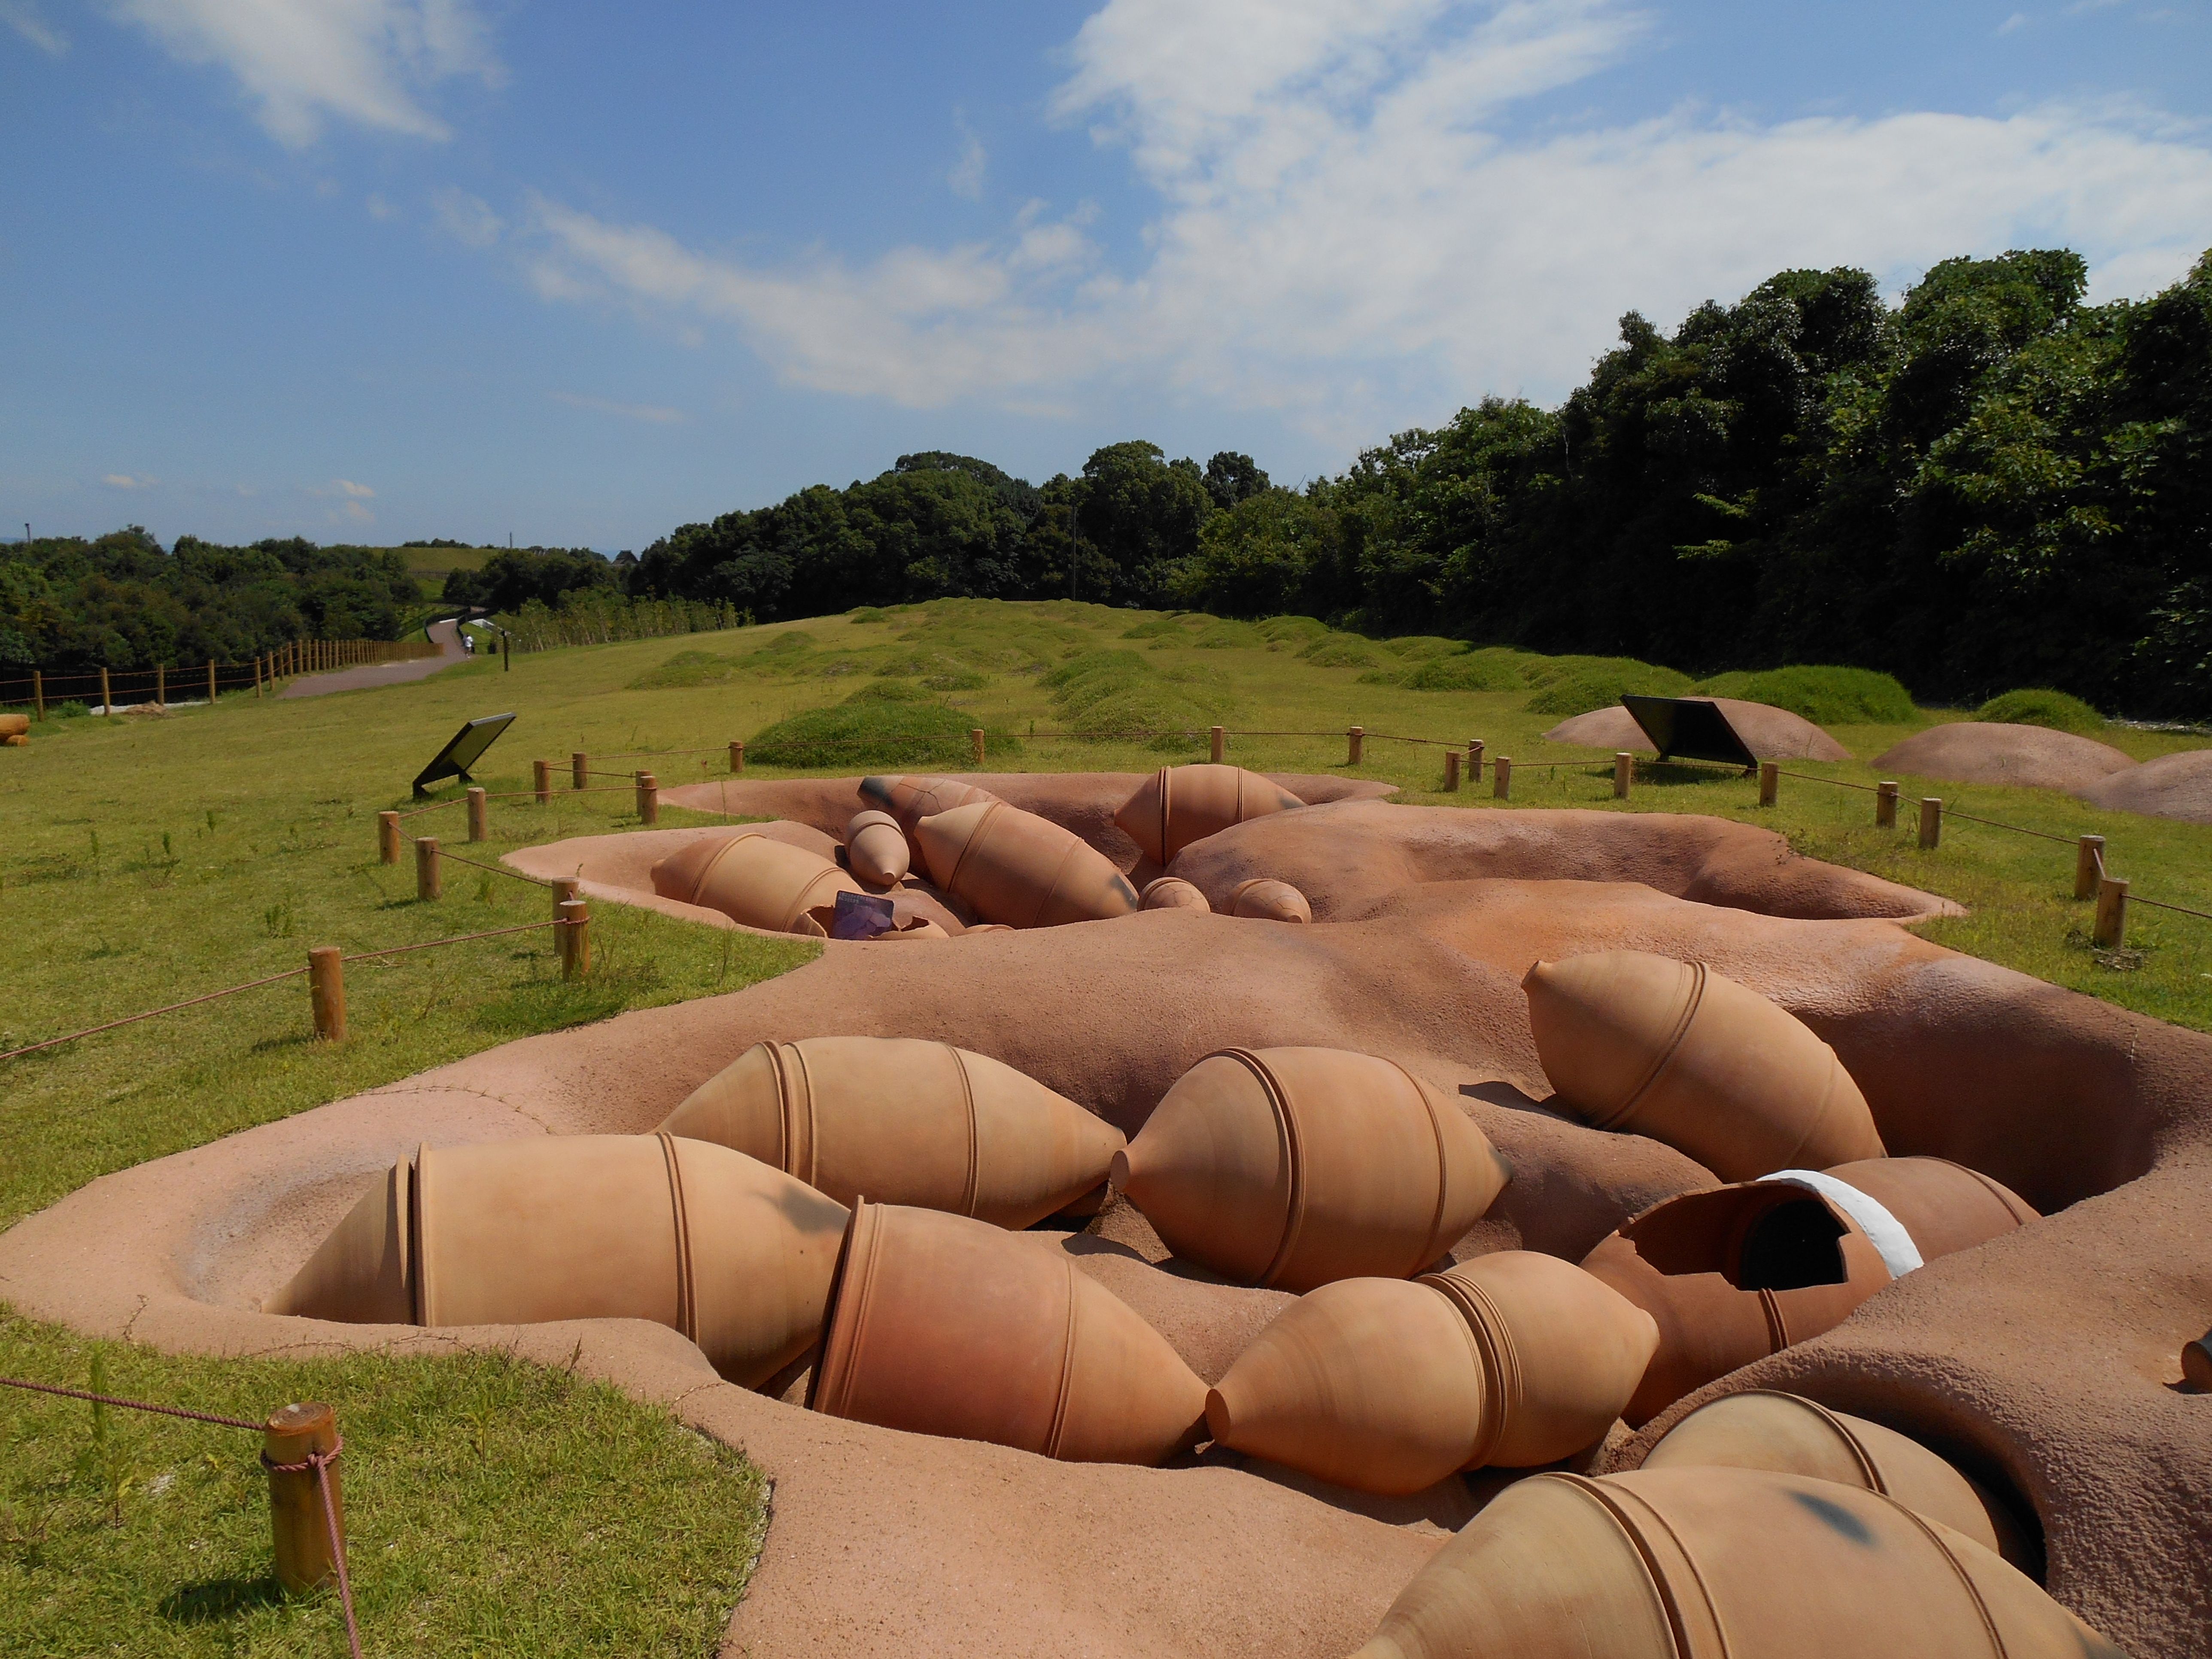 A reconstructed area of Yayoi Period cemetery at Yoshinogari site in Saga, Japan 